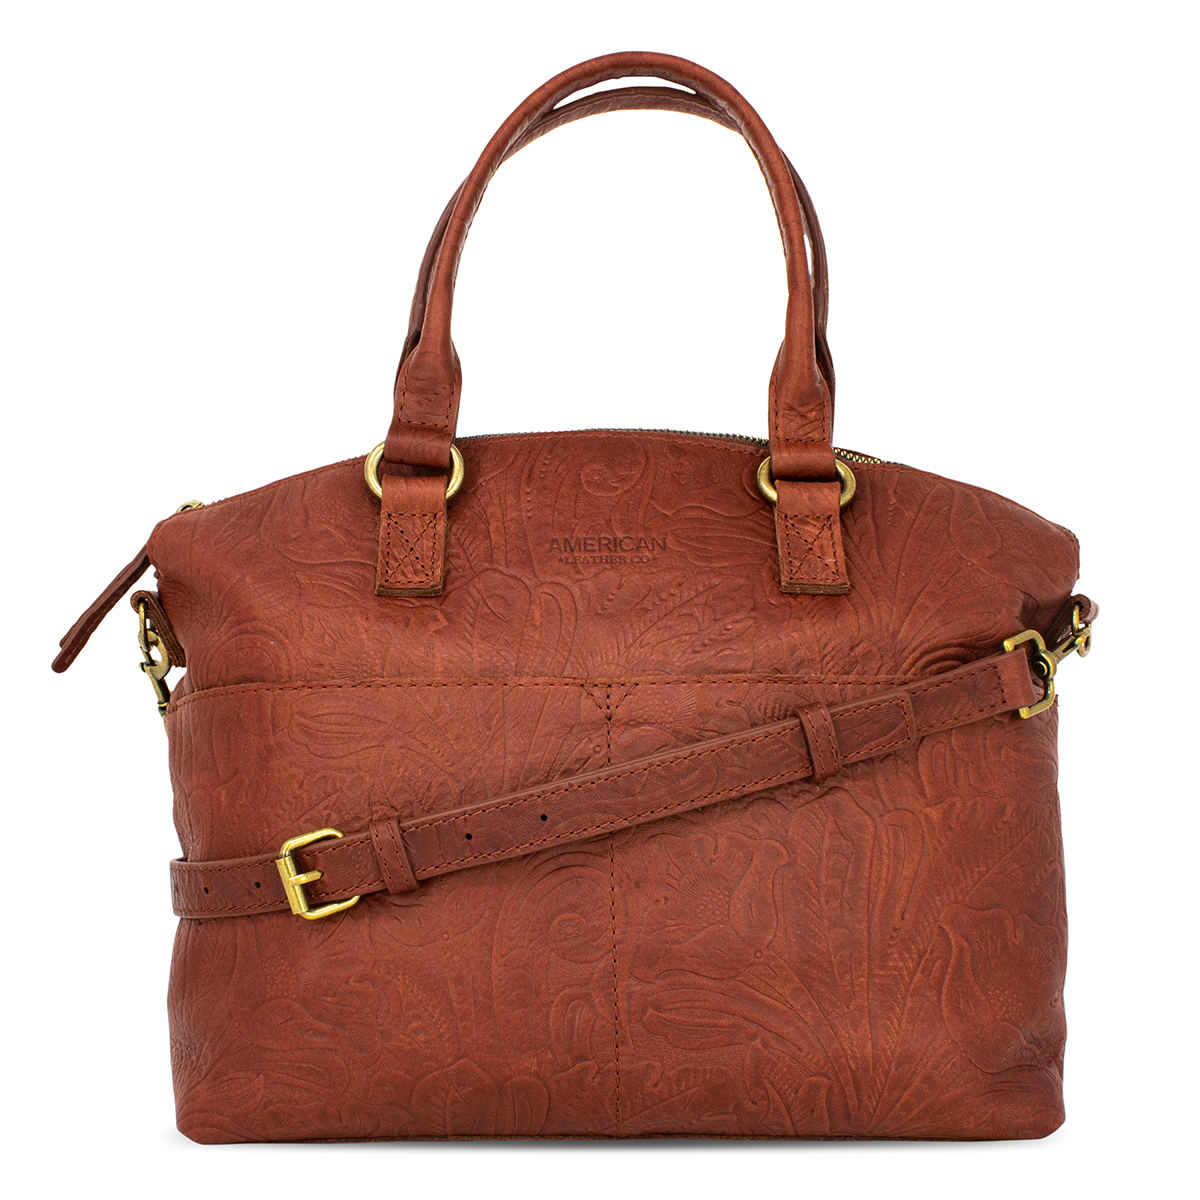 American Leather Co. Carrie Tooled Leather Dome Satchel